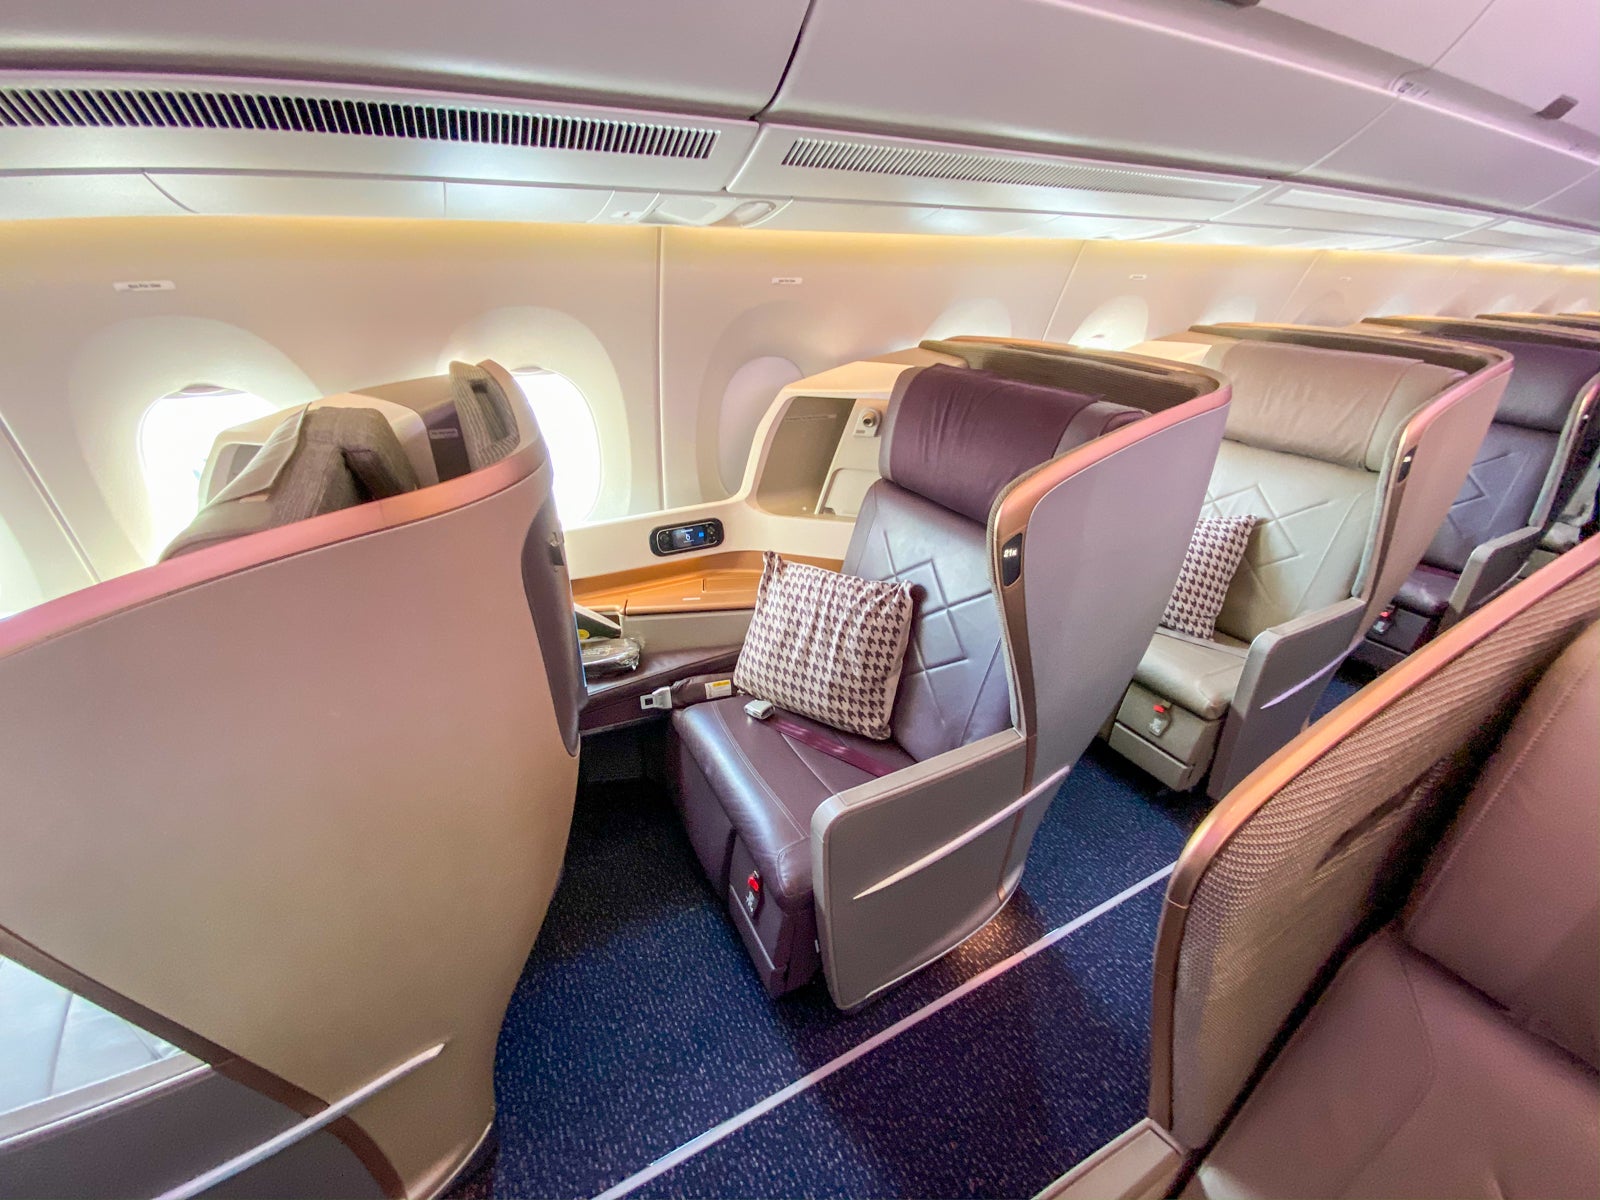 3. Singapore Airlines Business Class Review: Los Angeles to Singapore